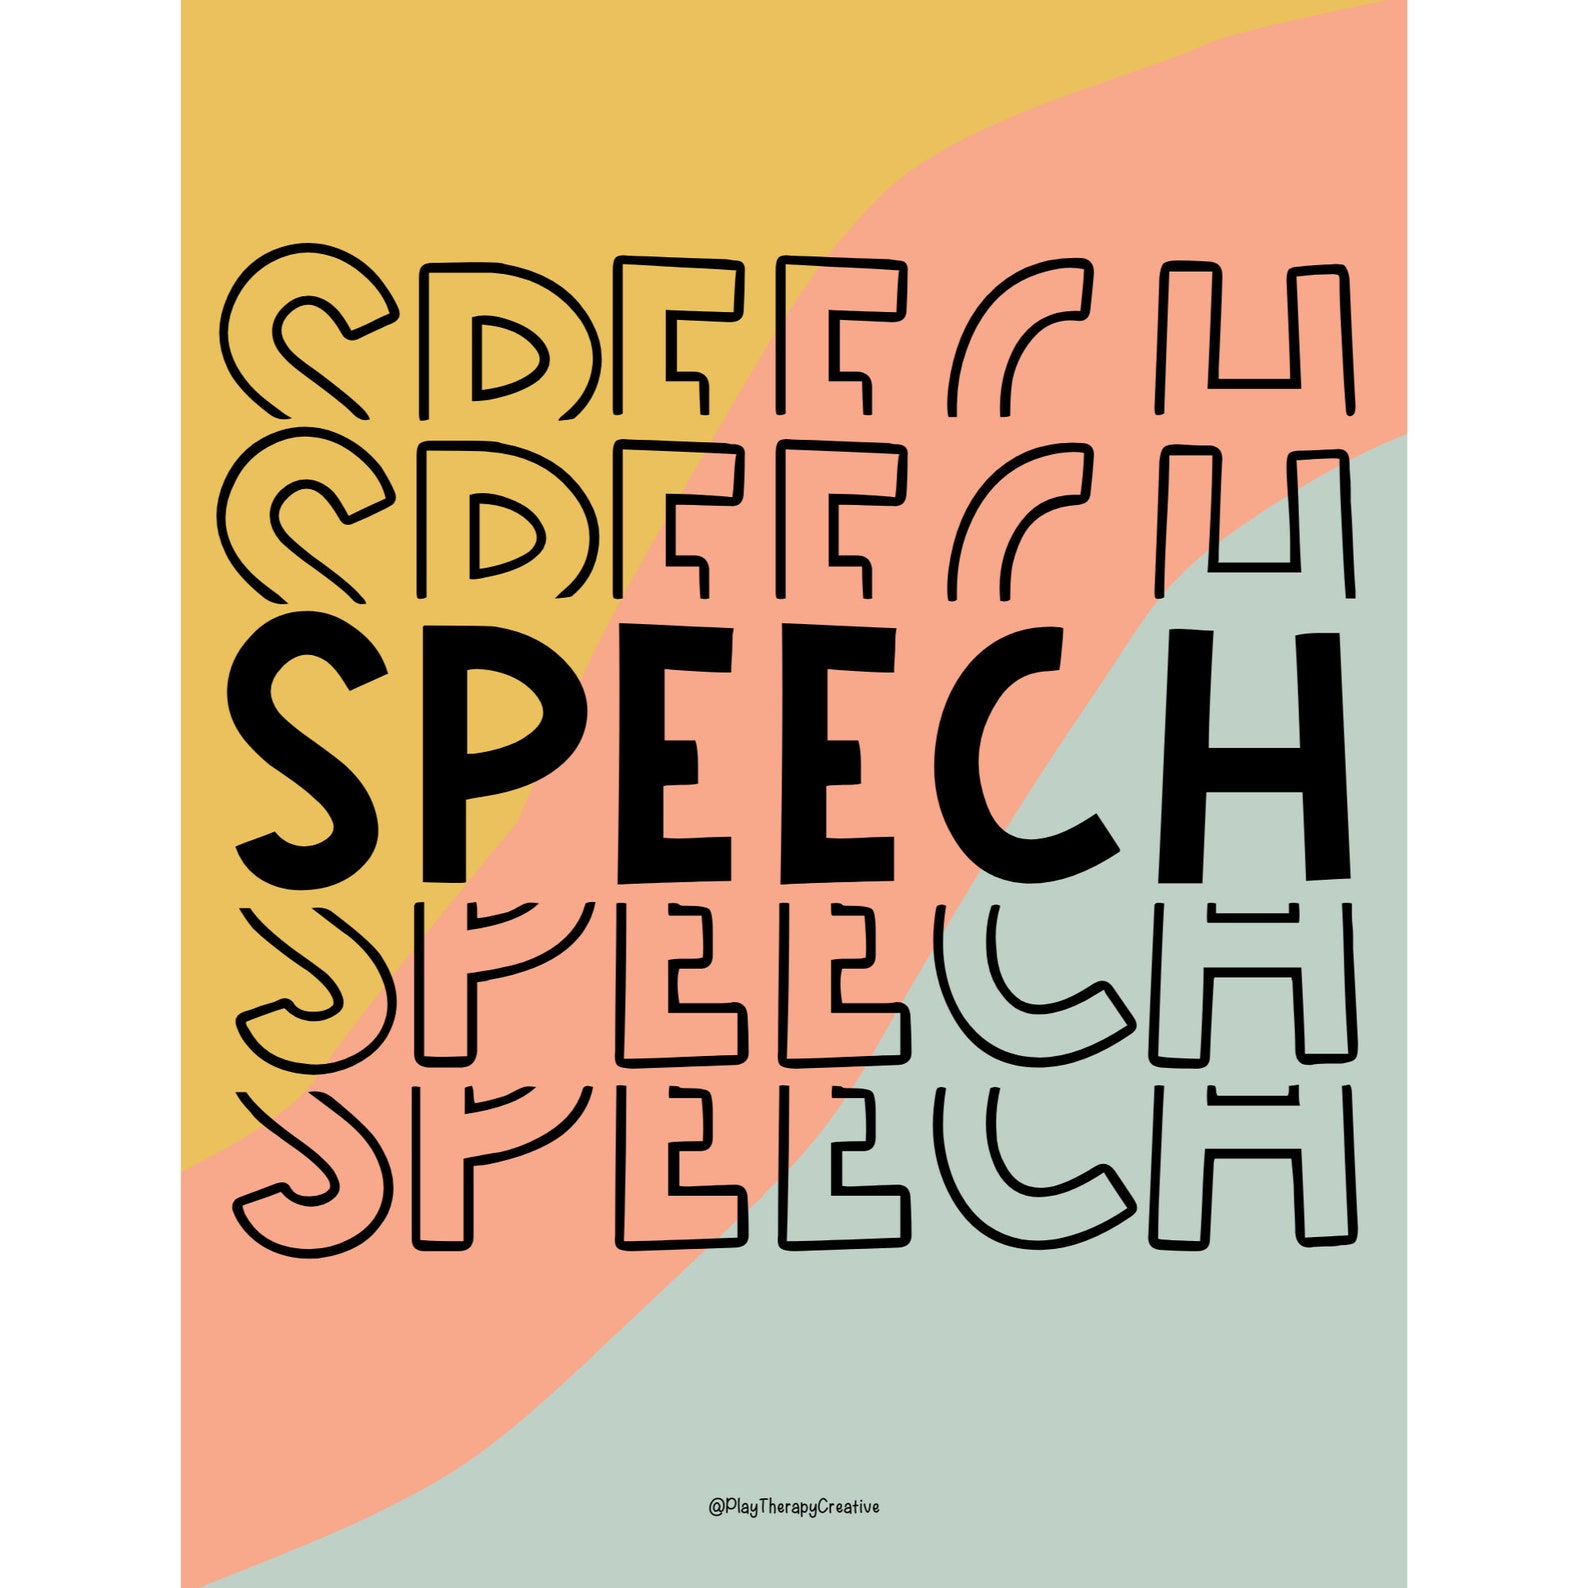 posters for speech therapy room